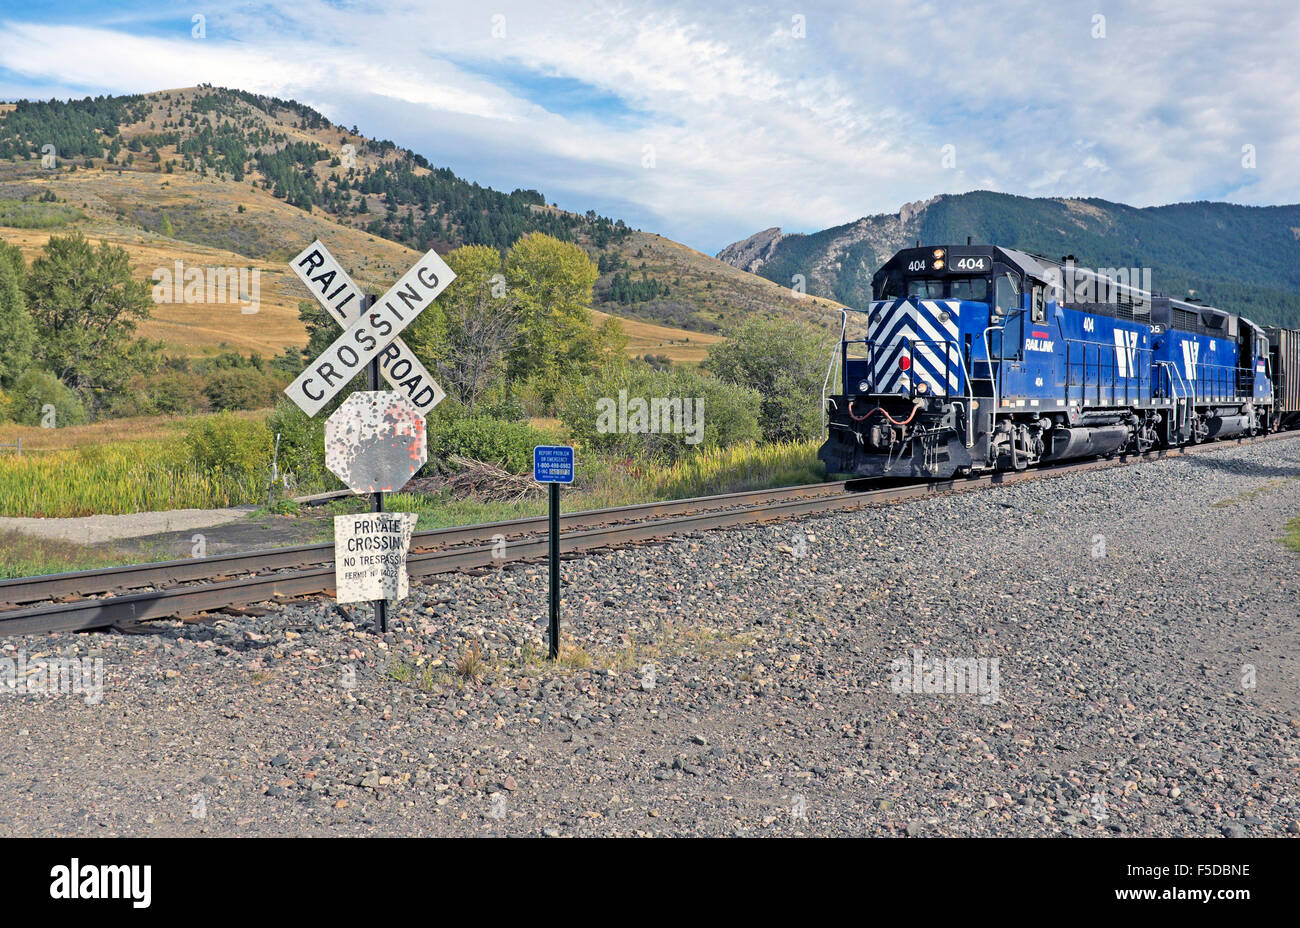 A Raillink work train at a private crossing on the mainline tracks coming into Bozeman, Montana. Stock Photo